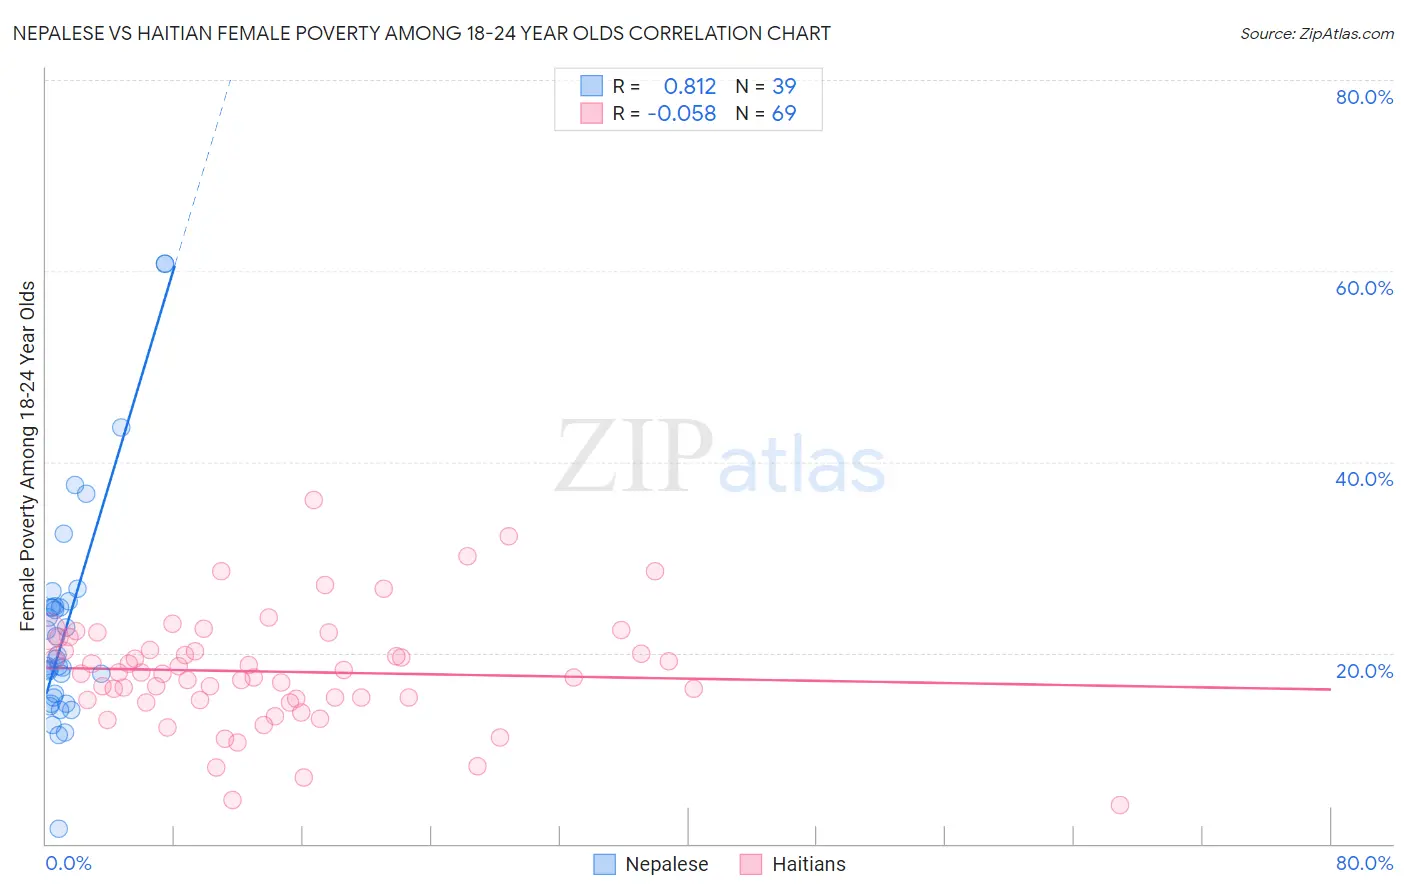 Nepalese vs Haitian Female Poverty Among 18-24 Year Olds